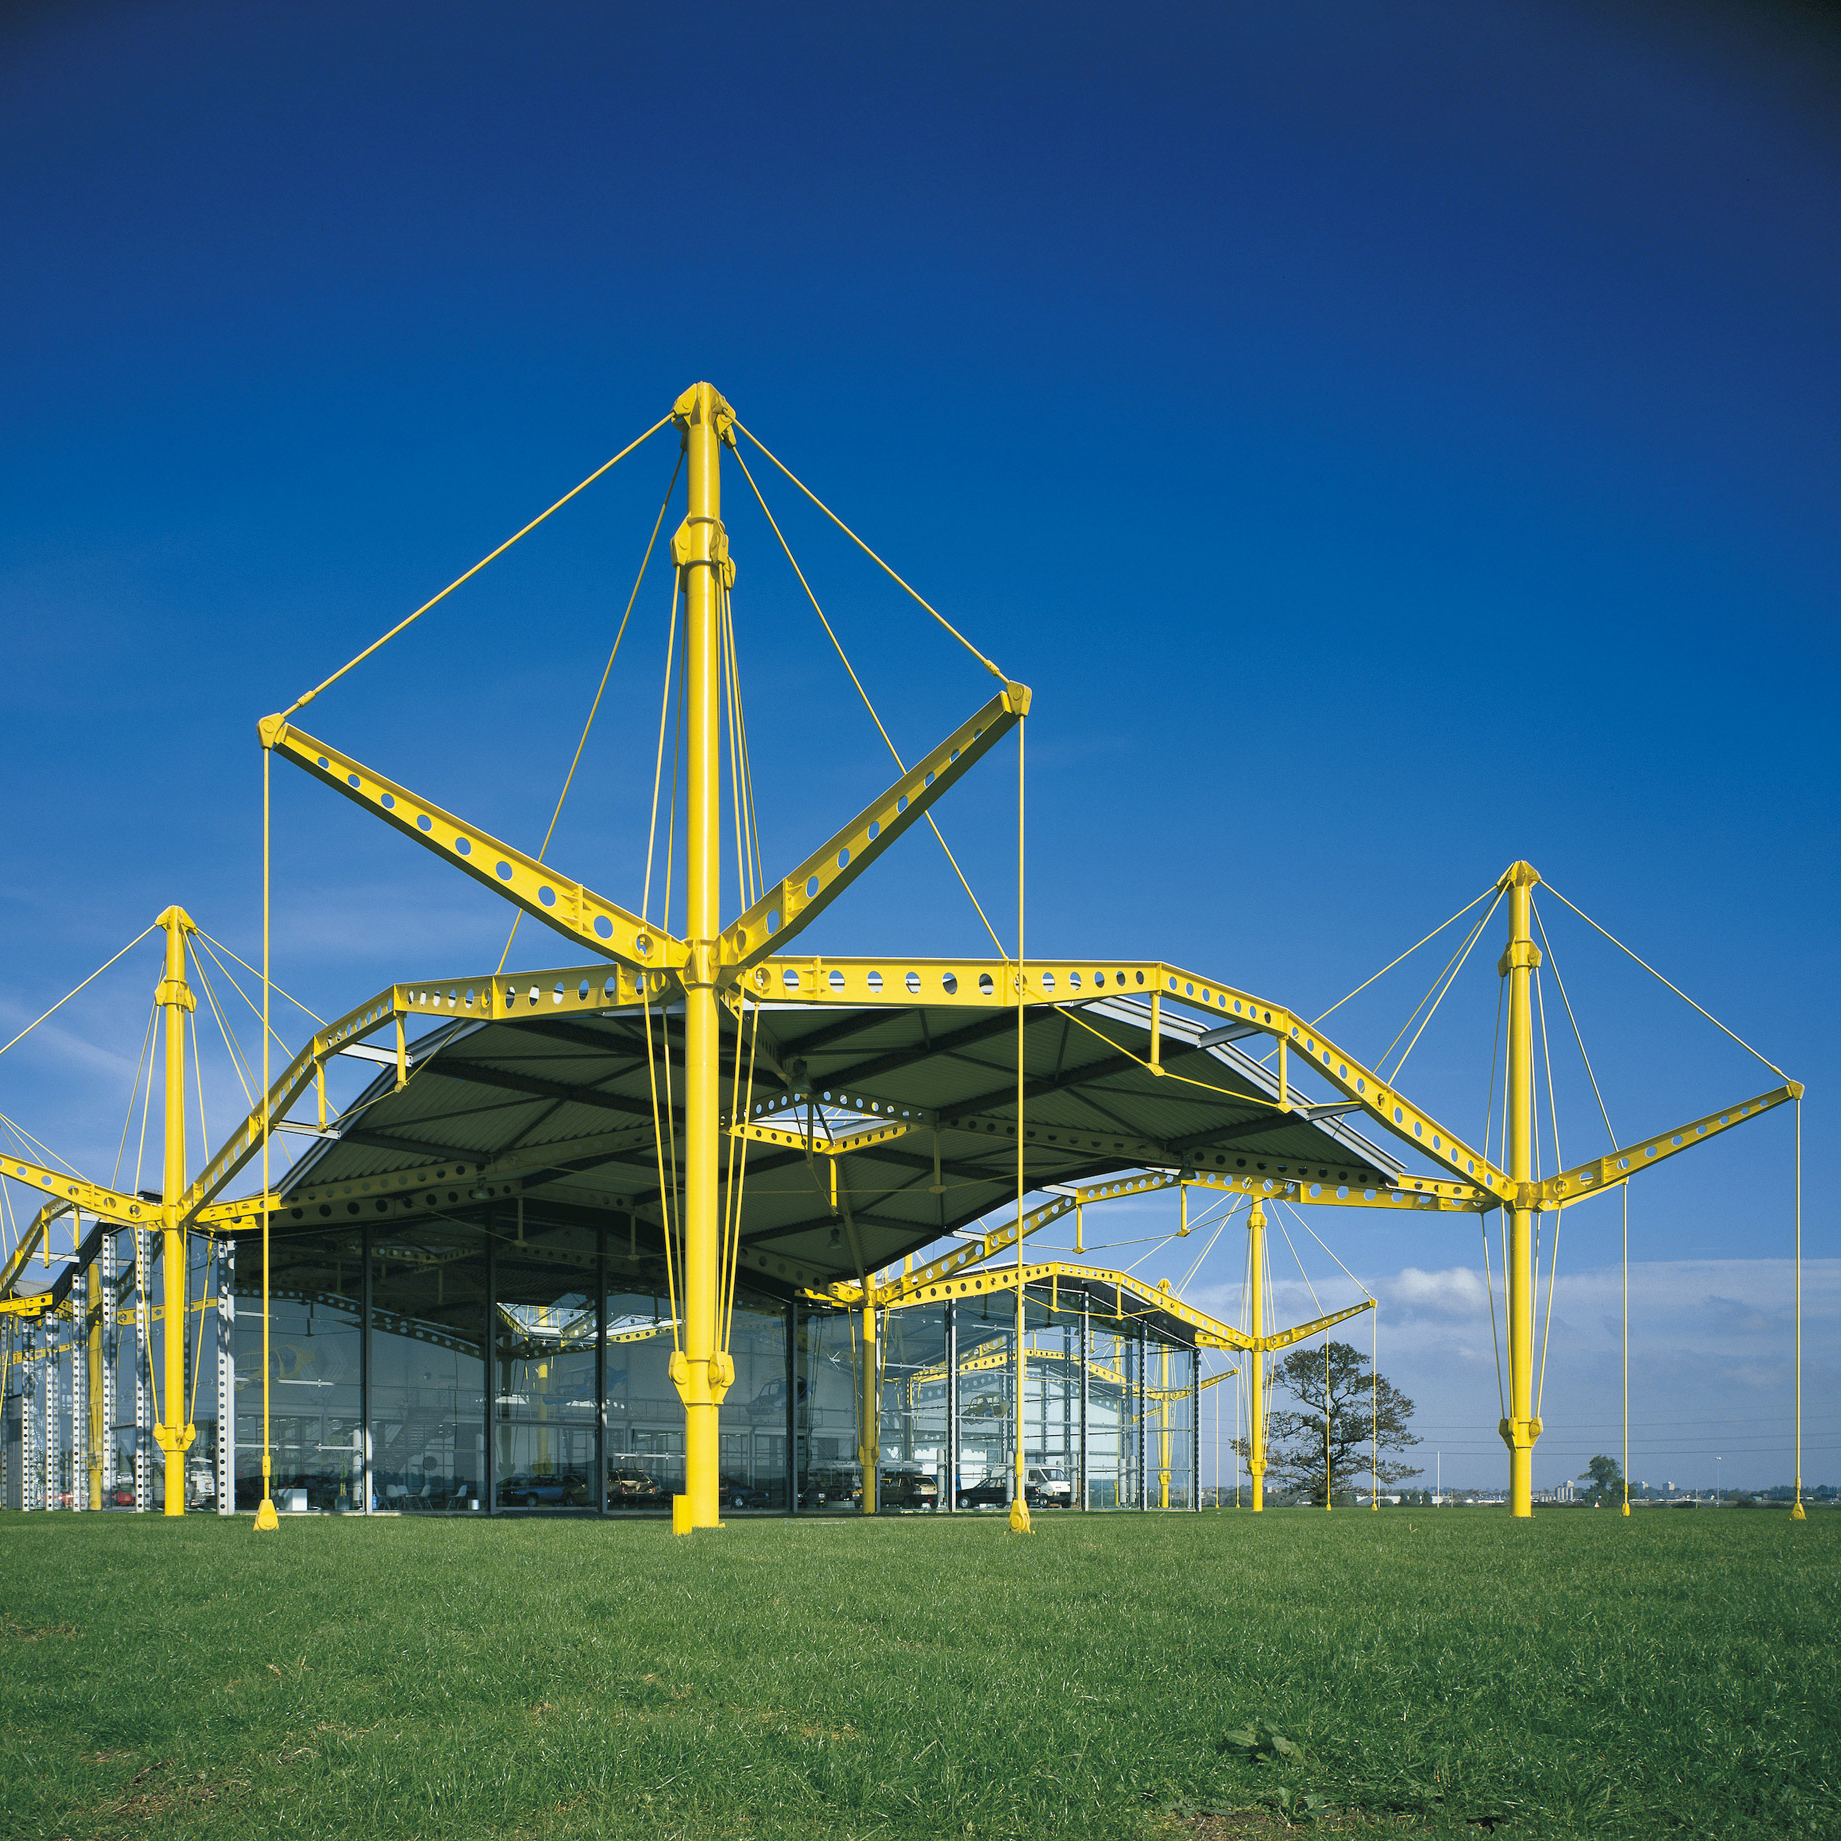 High-tech architecture from A to Z: Renault Distribution Centre by Norman Foster